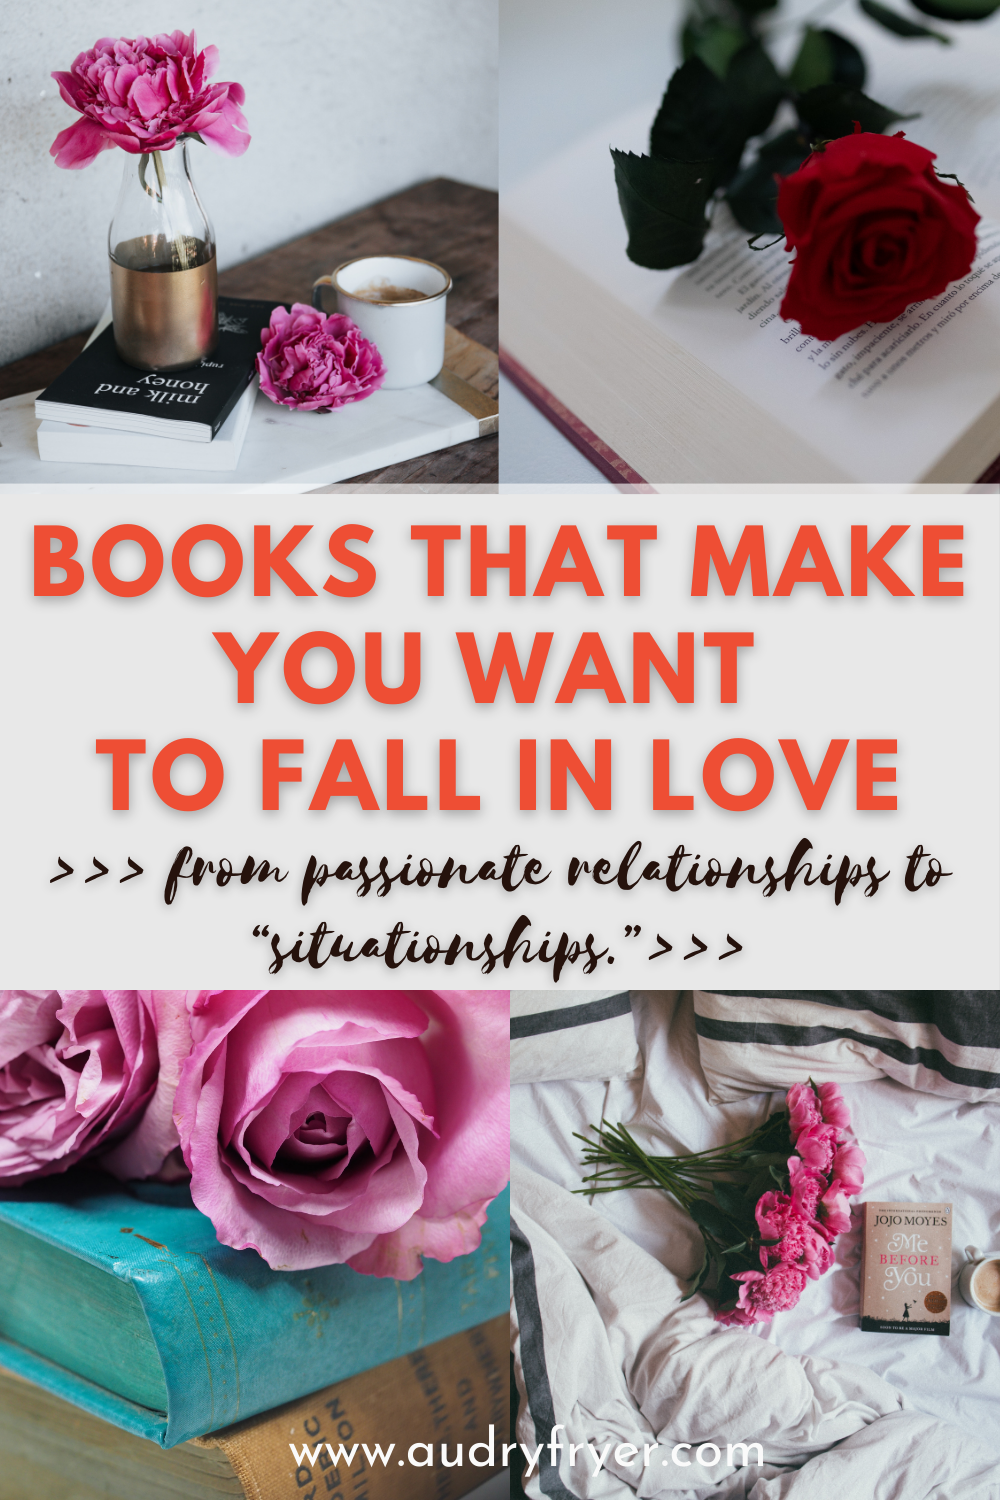 roses and books with text: books that make you want to fall in love - from passionate relationships to situationships